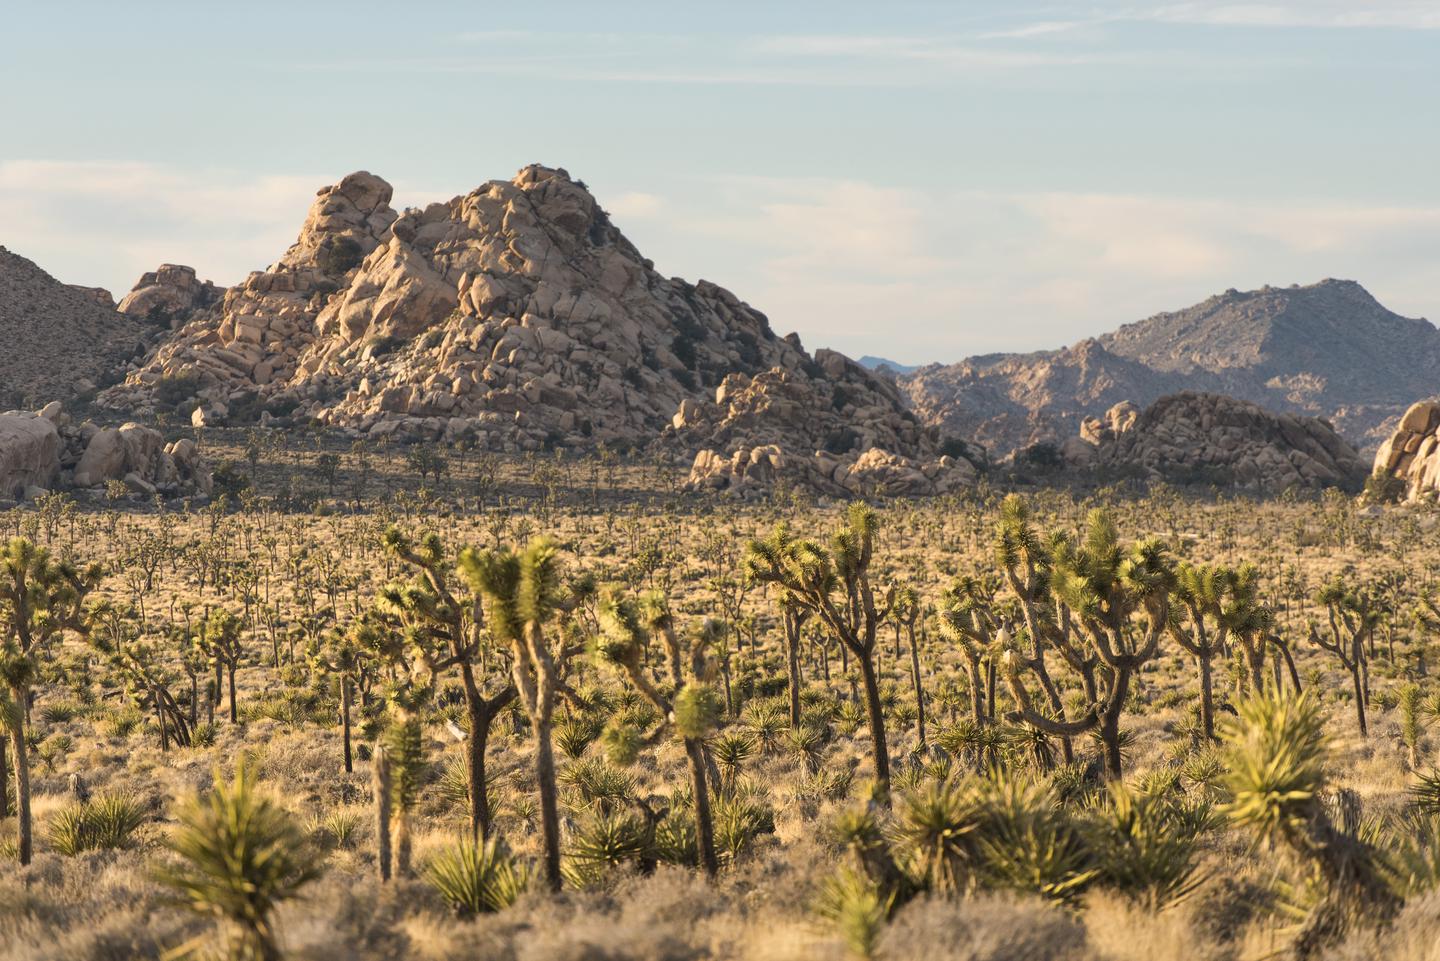 Lost Horse ValleyTake in views of the park's iconic Joshua trees and rock outcrops in Lost Horse Valley.